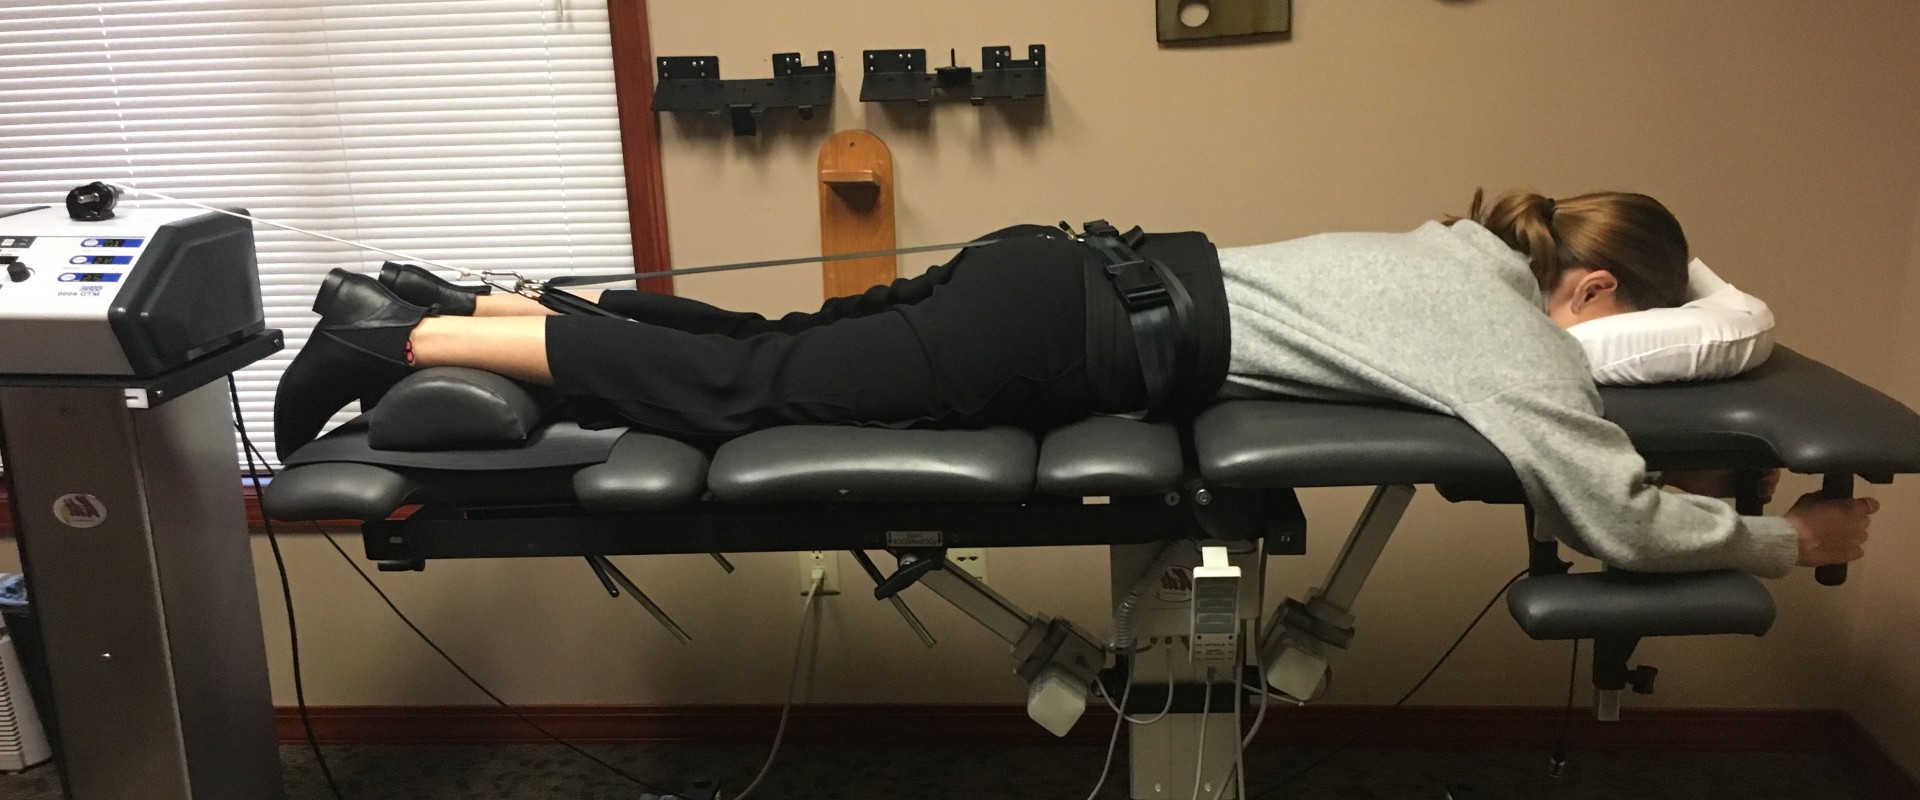 How long should you be on a decompression table?